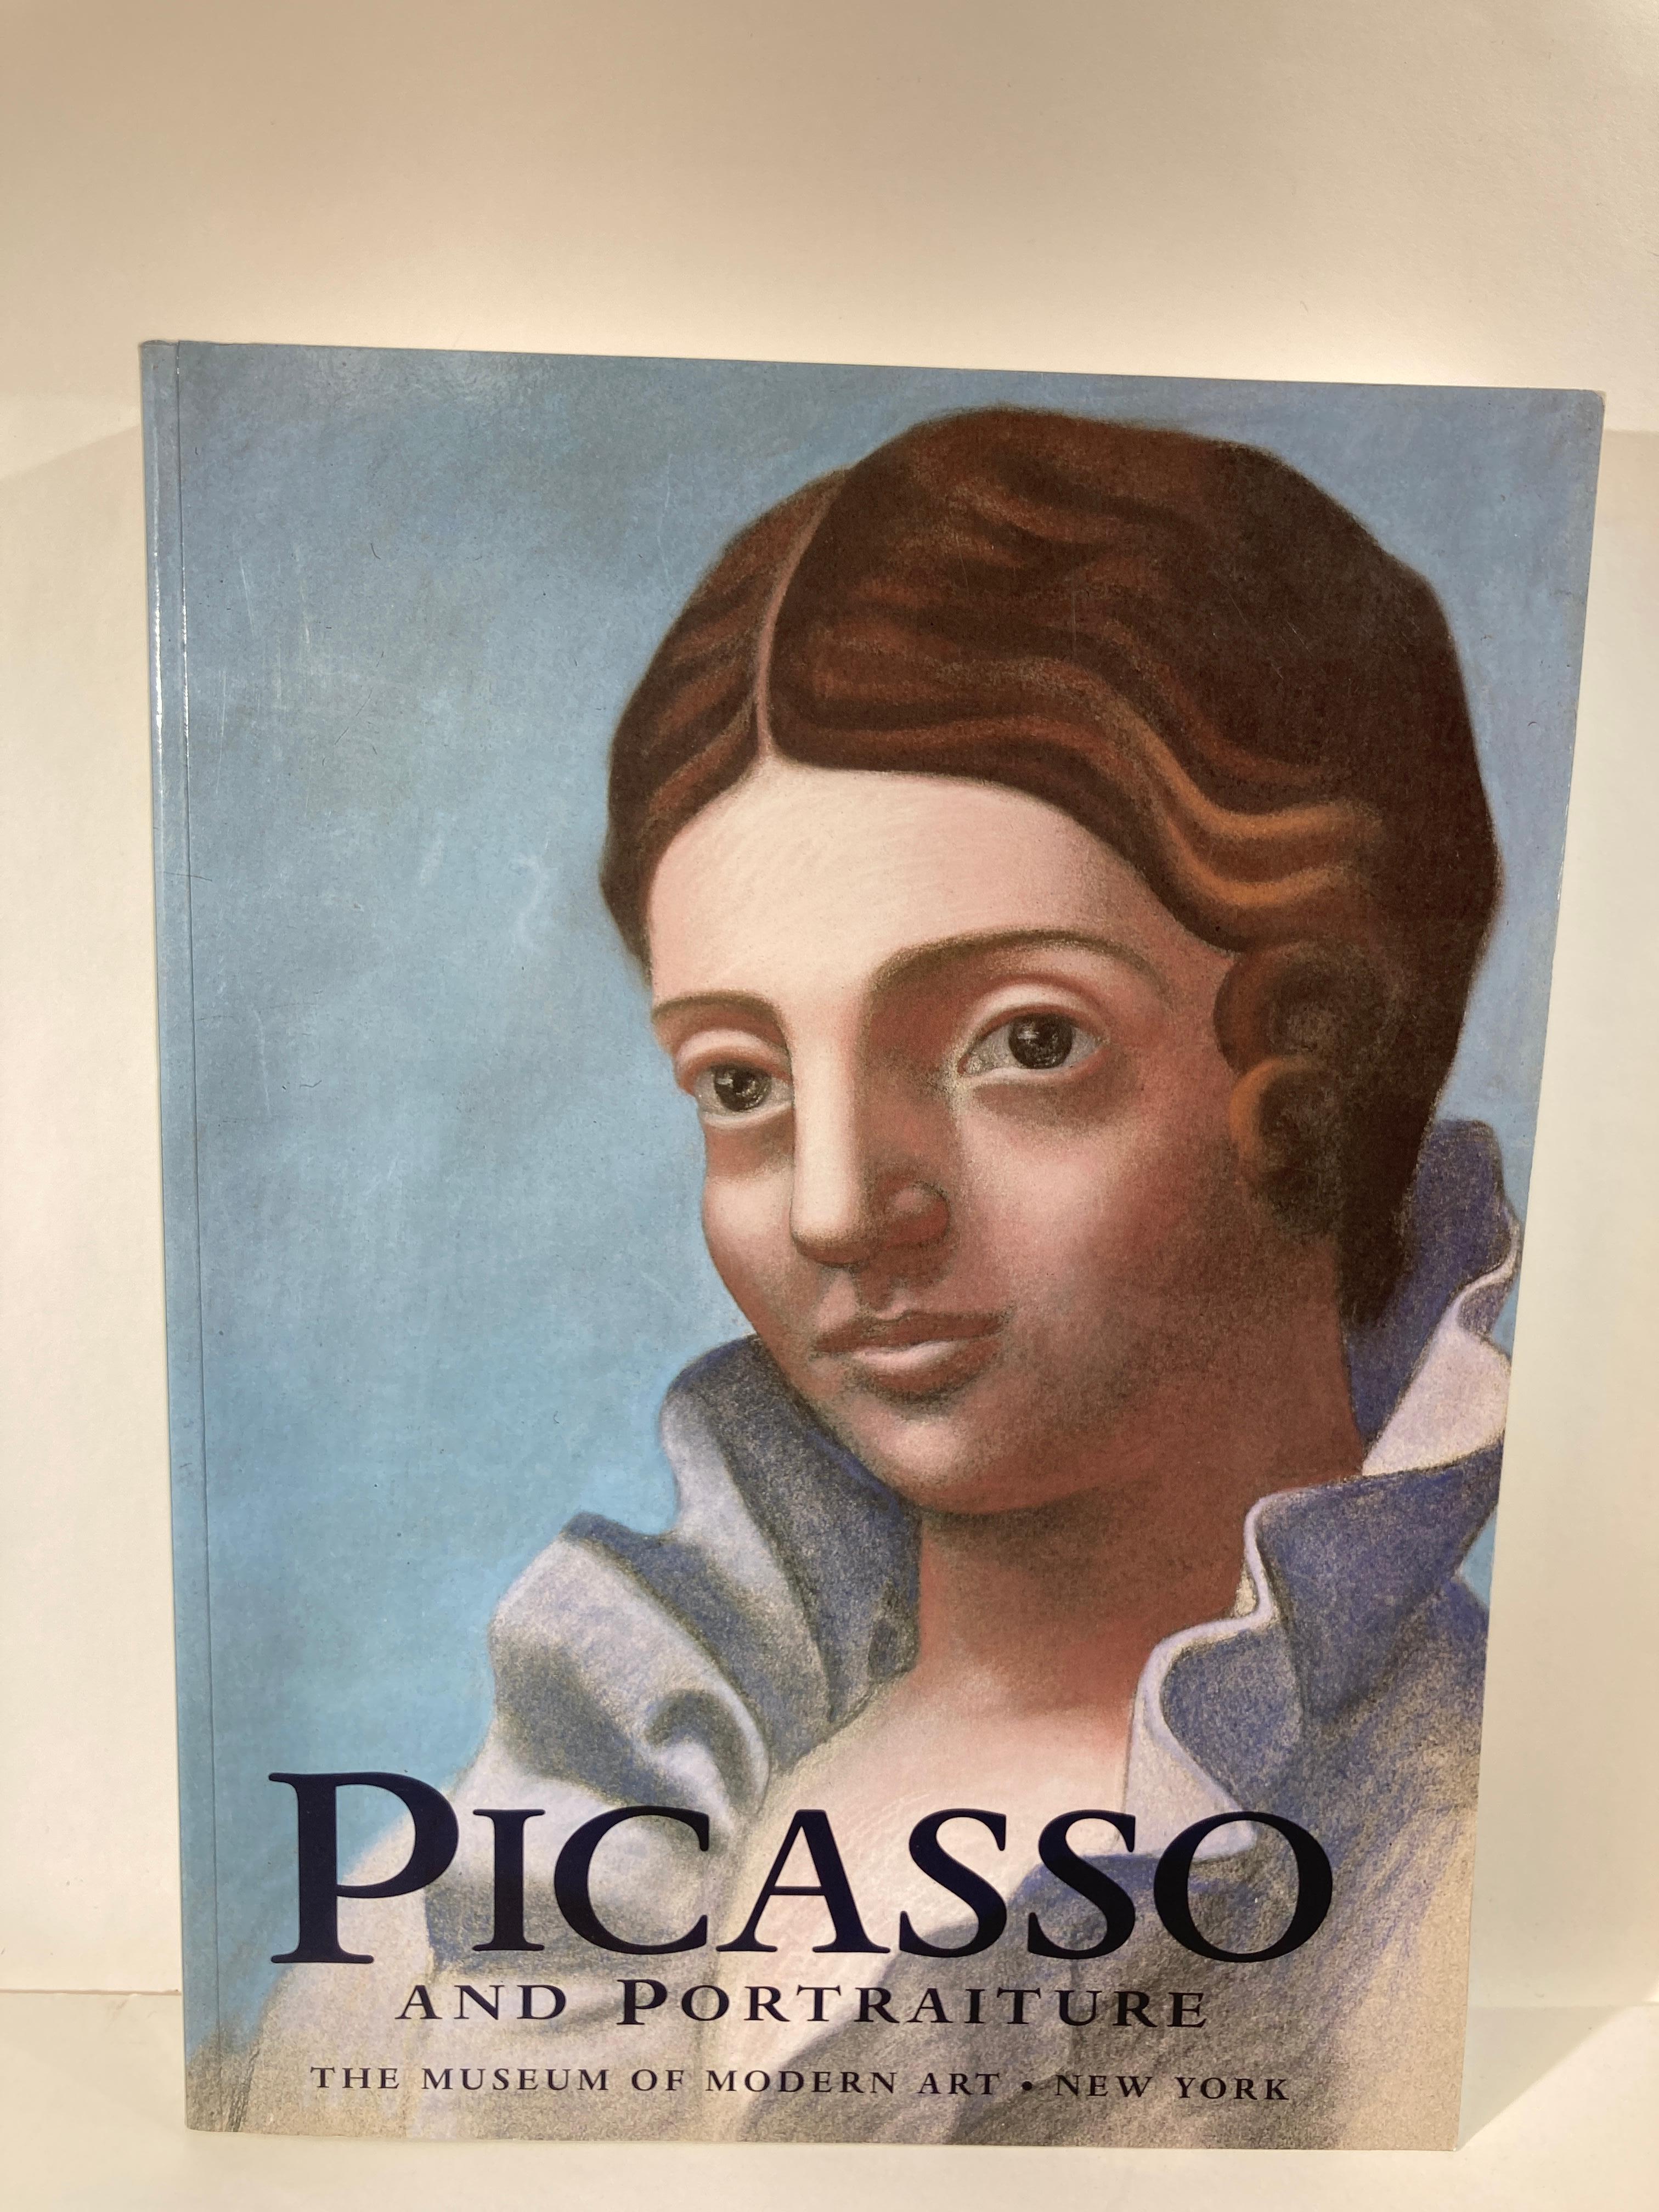 Expressionist Picasso and Portraiture by William Rubin Book For Sale